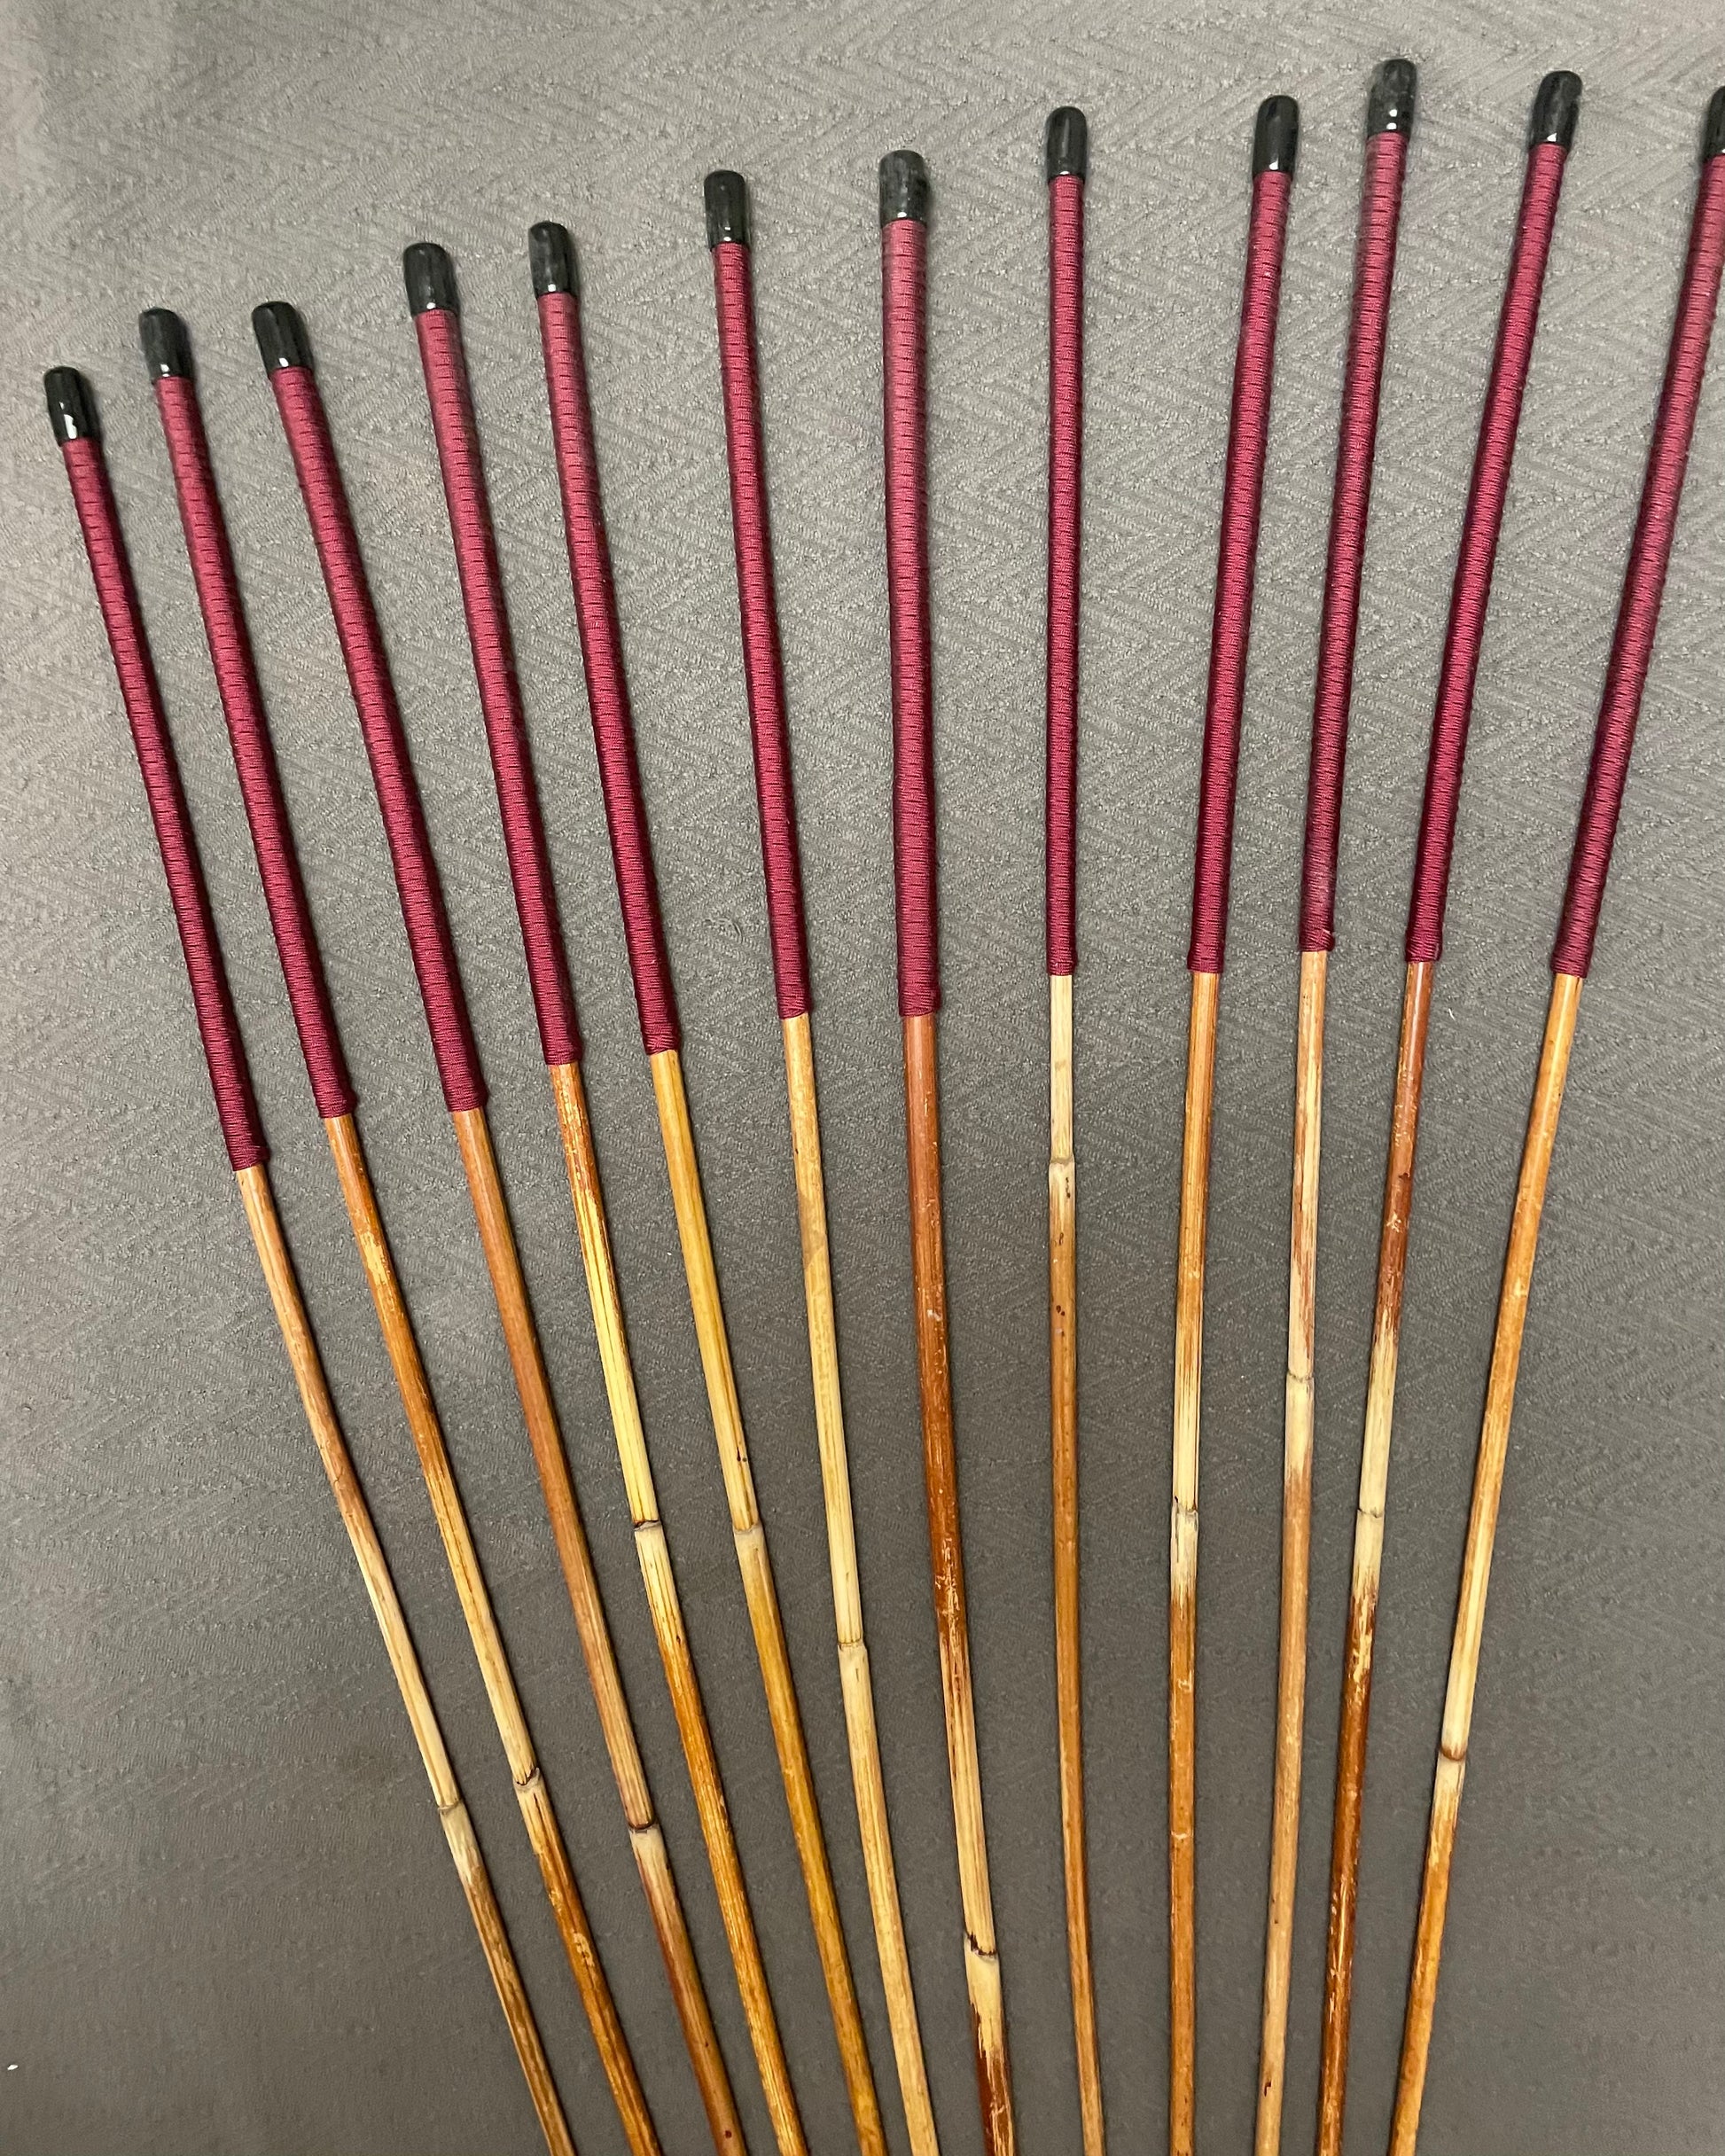 Set of 12 Classic Dragon Rattan Punishment Canes with Burgundy Paracord Handles - 95 to 100 cms Length - Sales Special